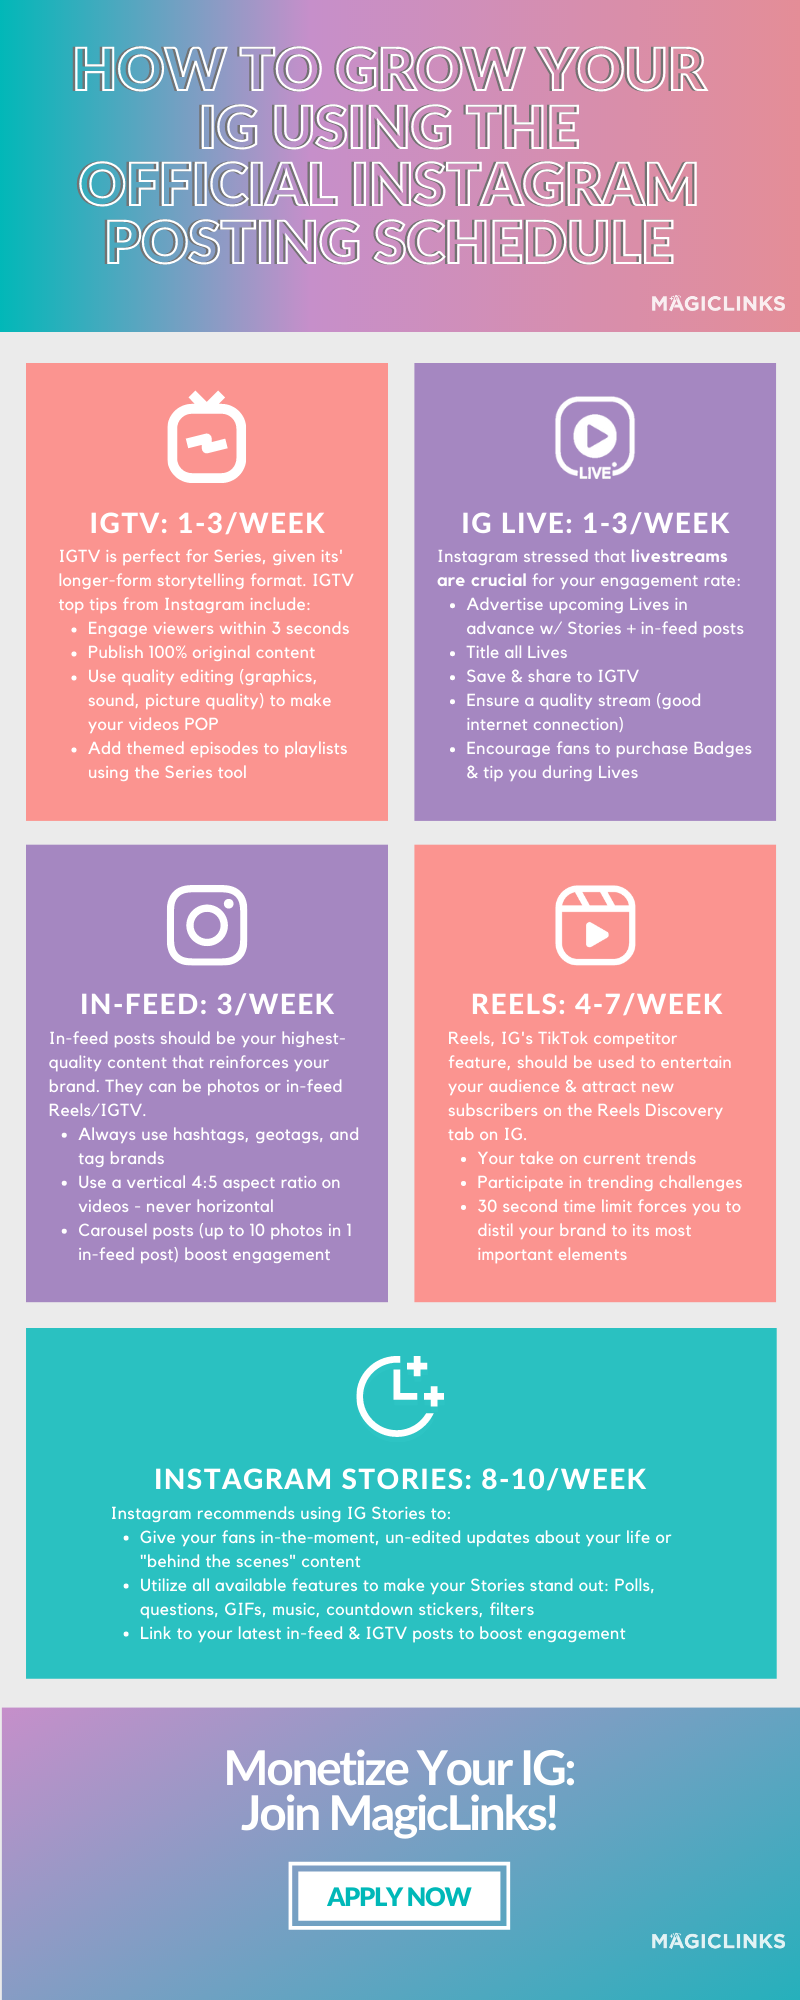 To get your content pushed to the top of your subscribers' Instagram feeds, try this Instagram-recommended weekly posting schedule